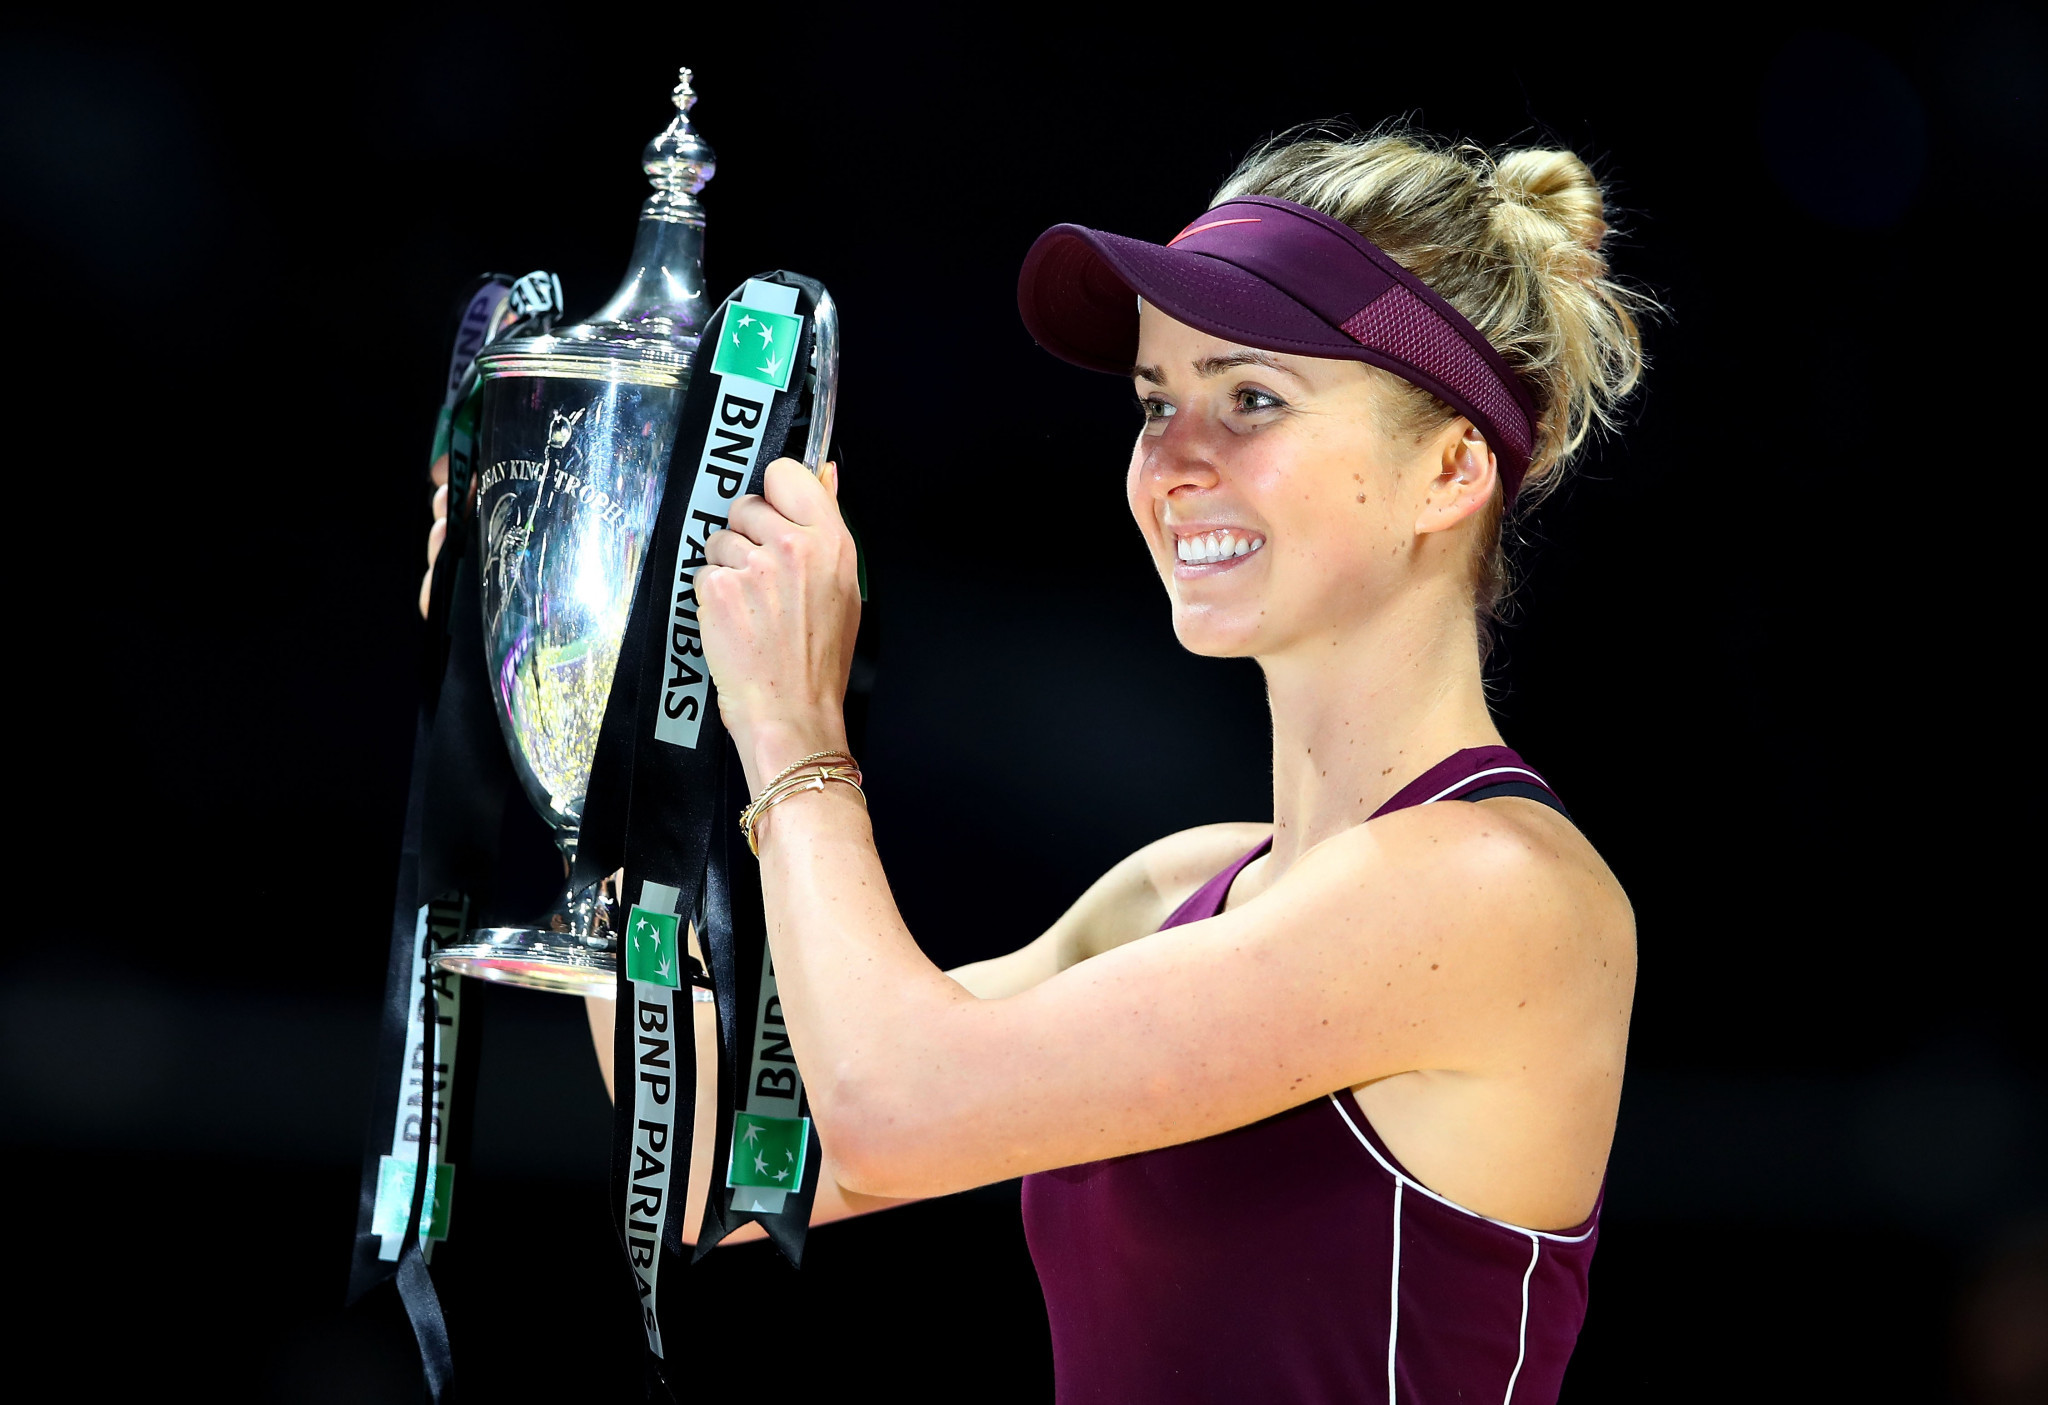 Elina Svitolina of Ukraine celebrates winning the WTA Finals in Singapore after defeating Sloane Stephens in the final ©Getty Images 